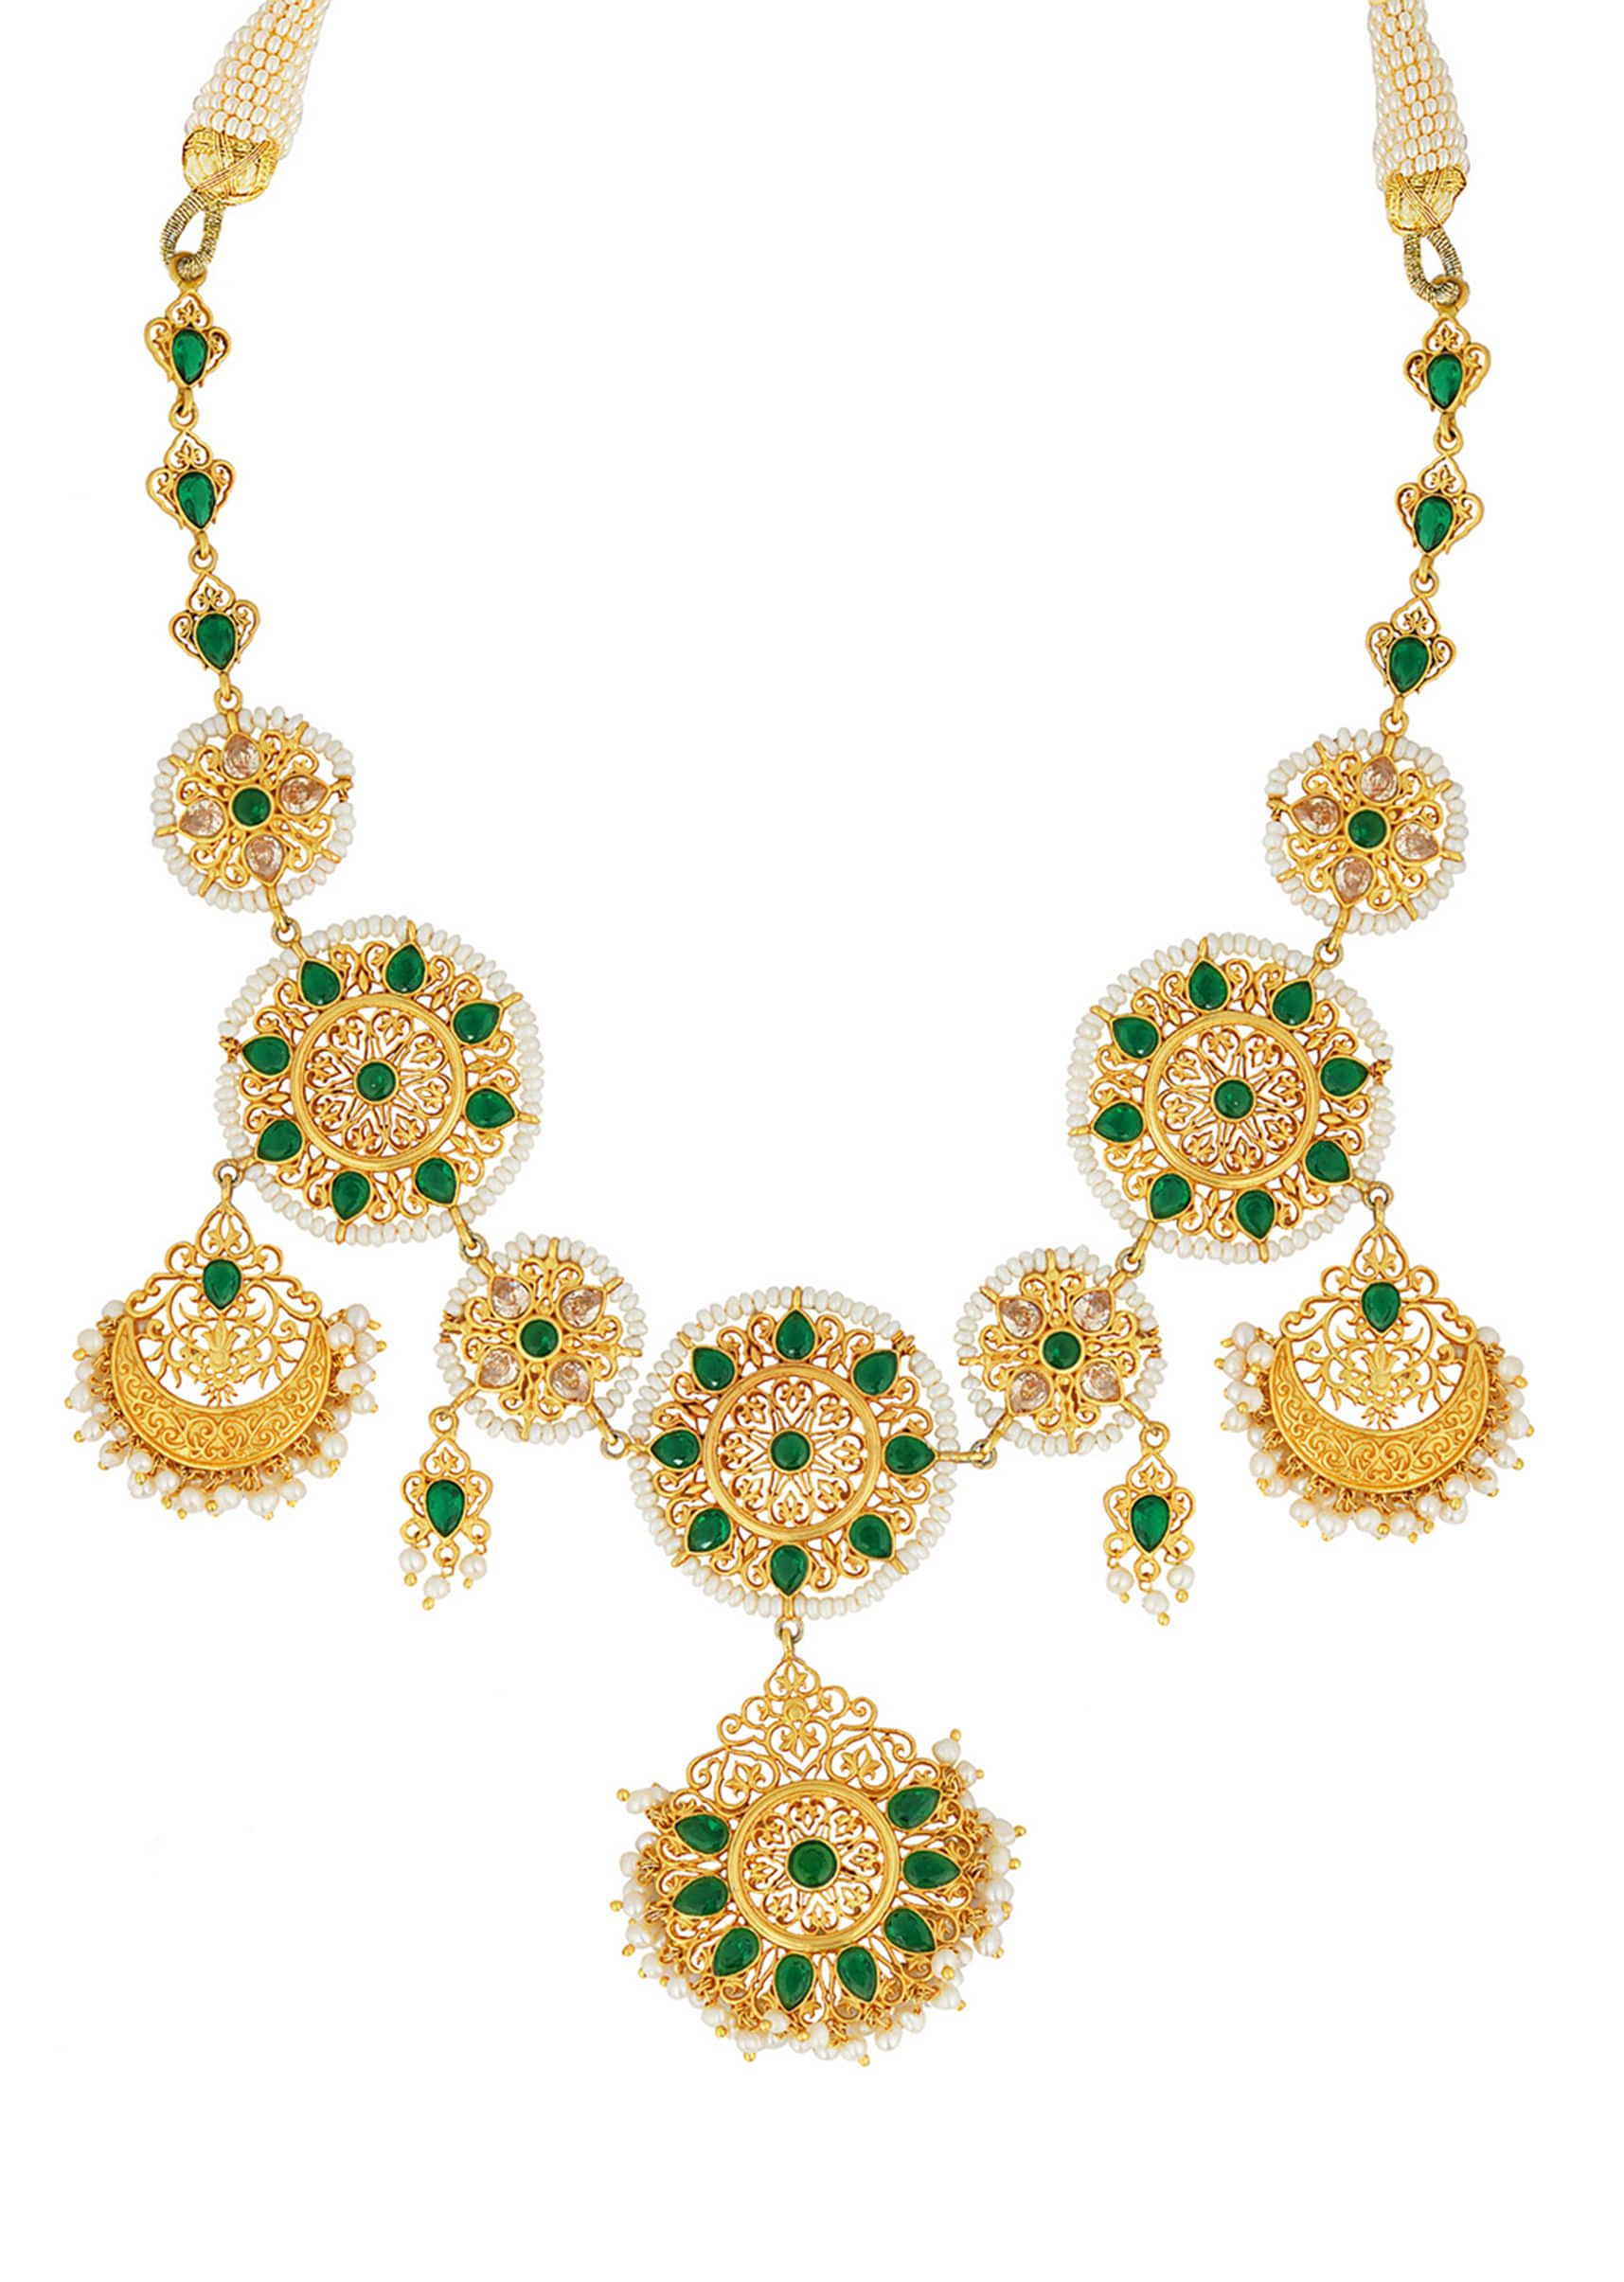 Green Cz Necklace In Floral Mughal Design With Pearls By Zariin